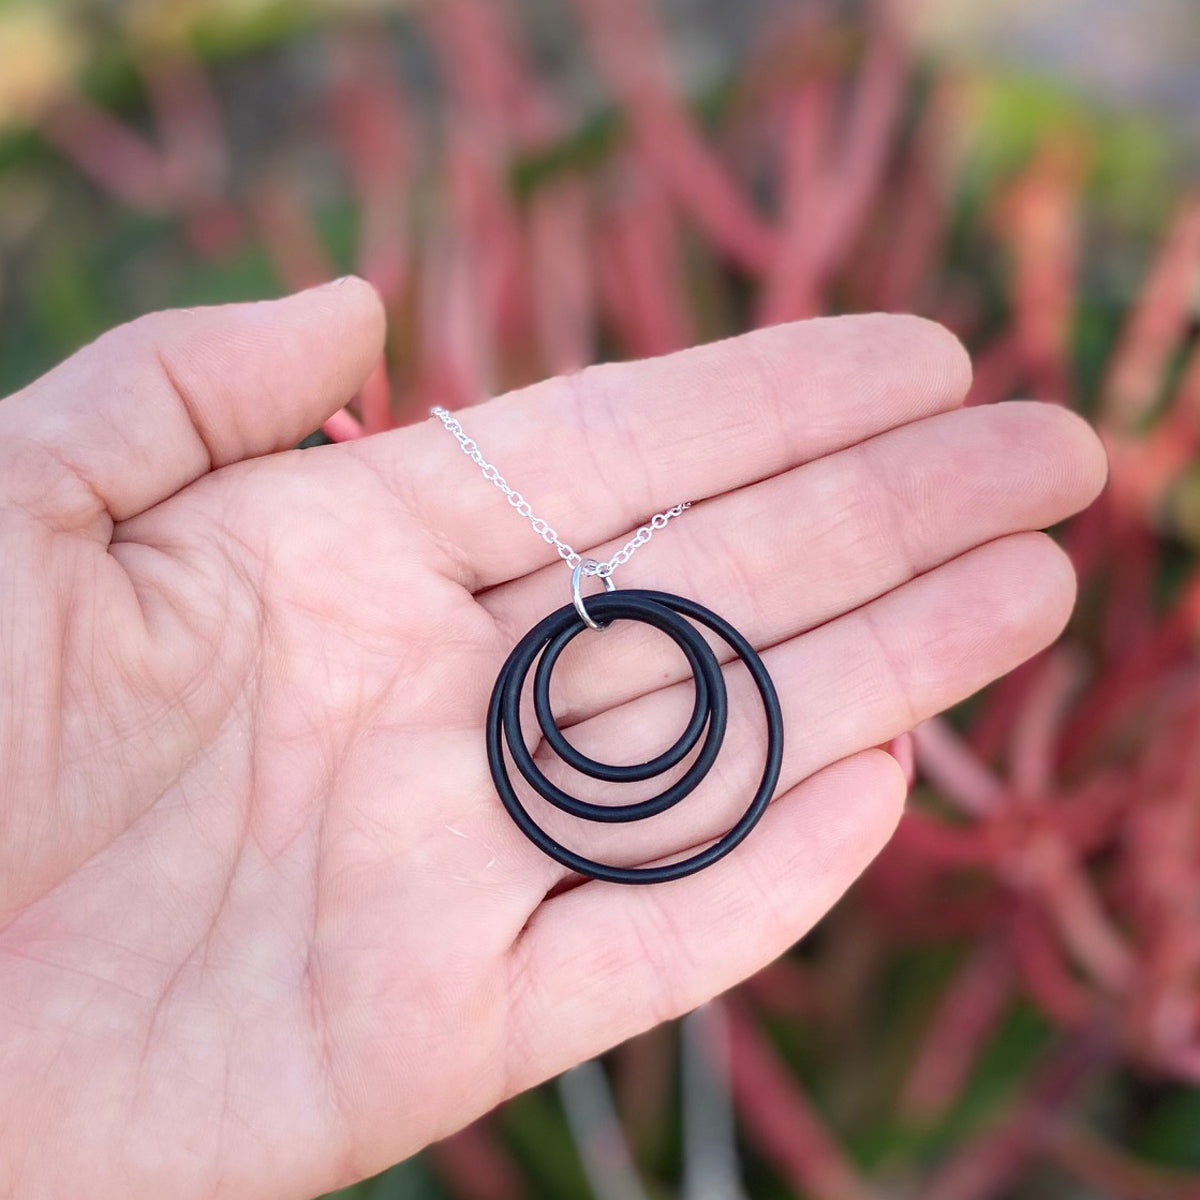 Zero Waste Necklace for Conscious Eco Living from recycled scuba gear